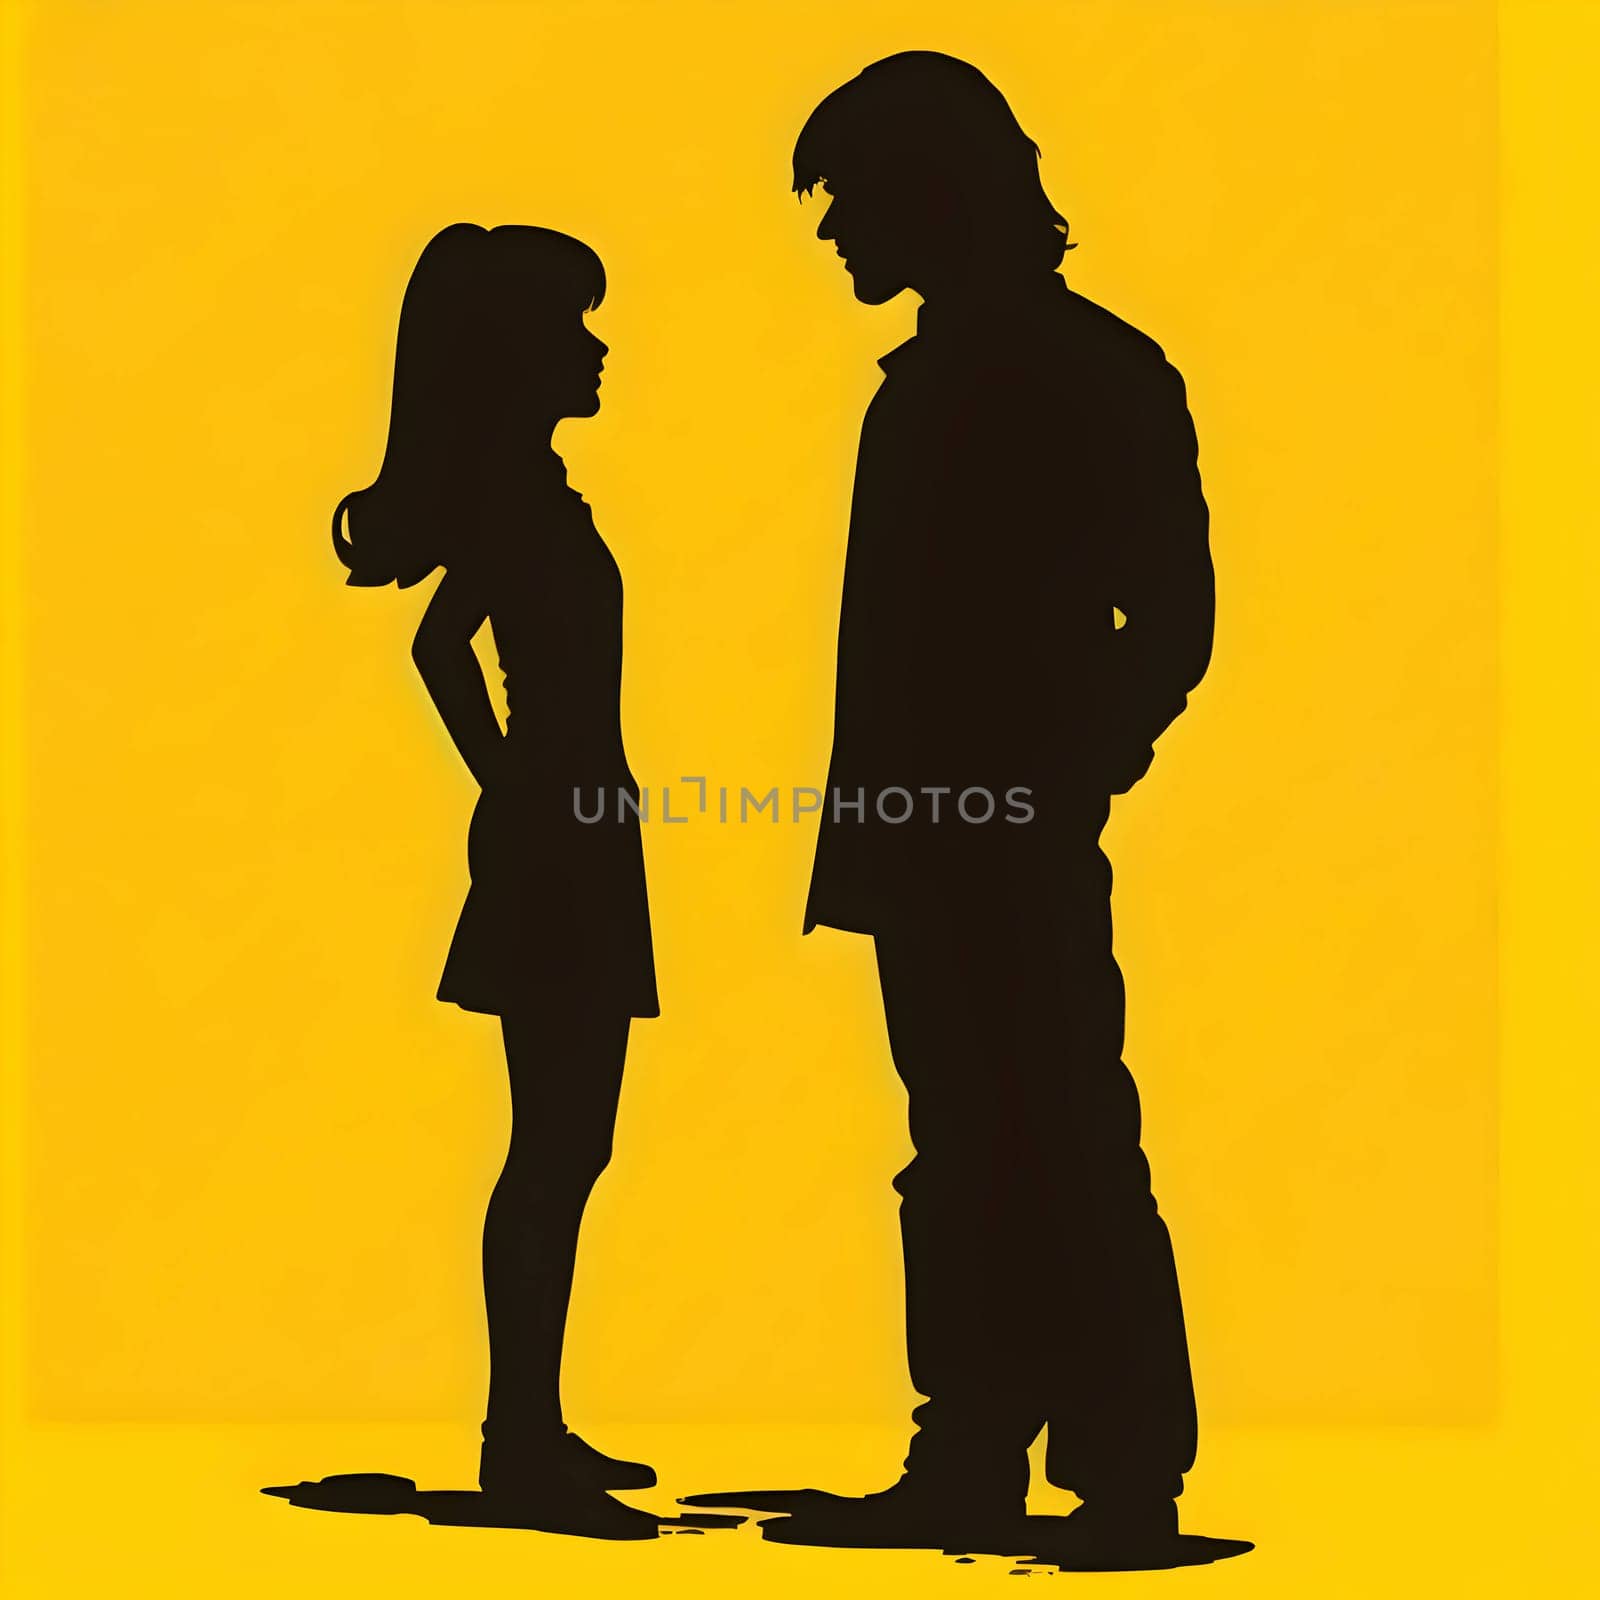 Vector illustration of couple in black silhouette against a clean yellow background, capturing graceful forms.